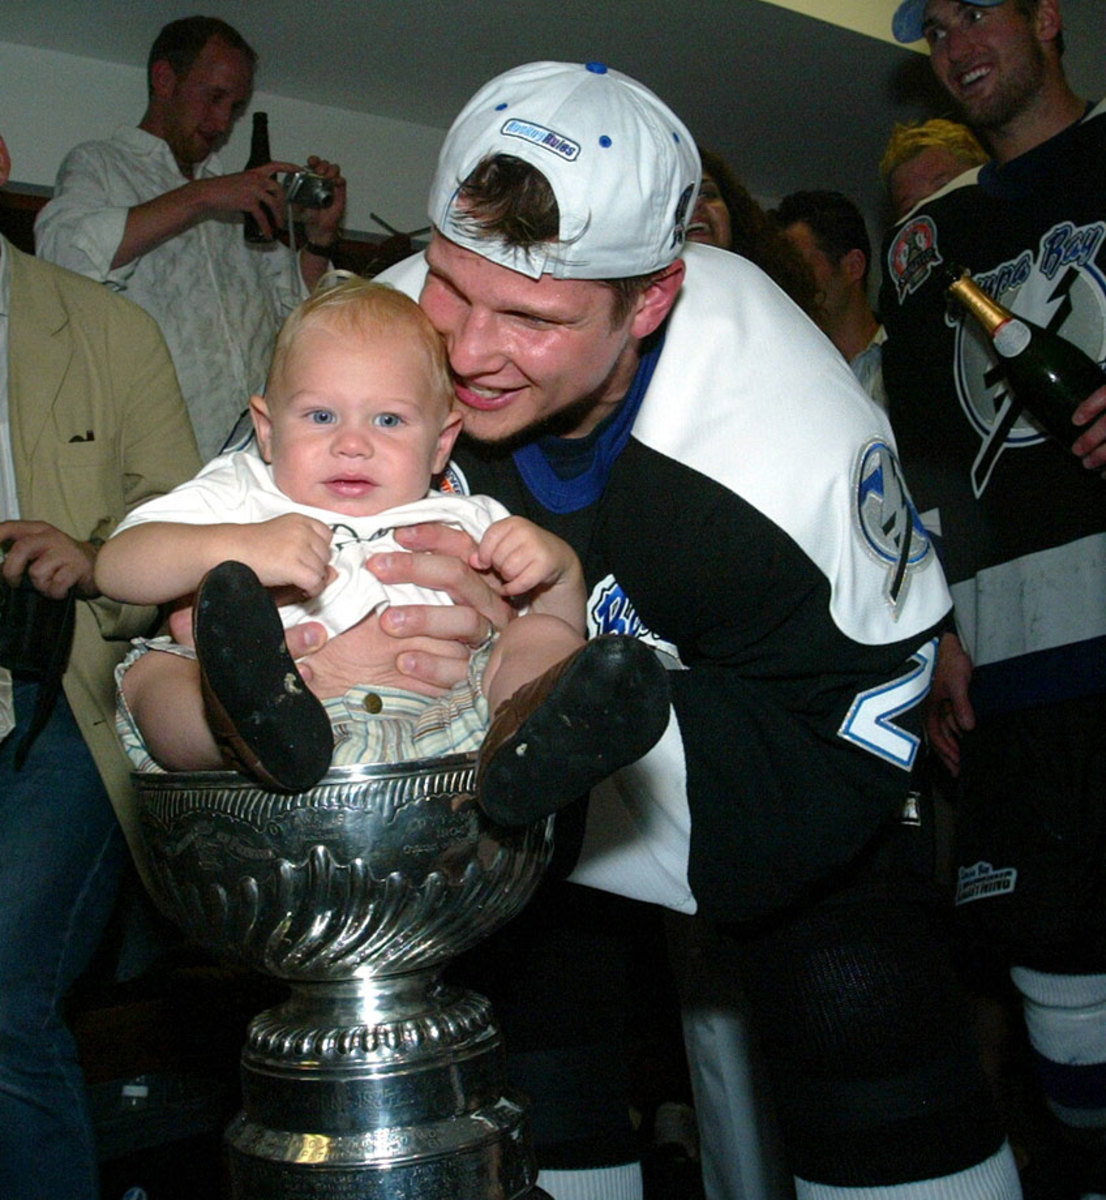 Photo: It's the Stanley Cup, baby